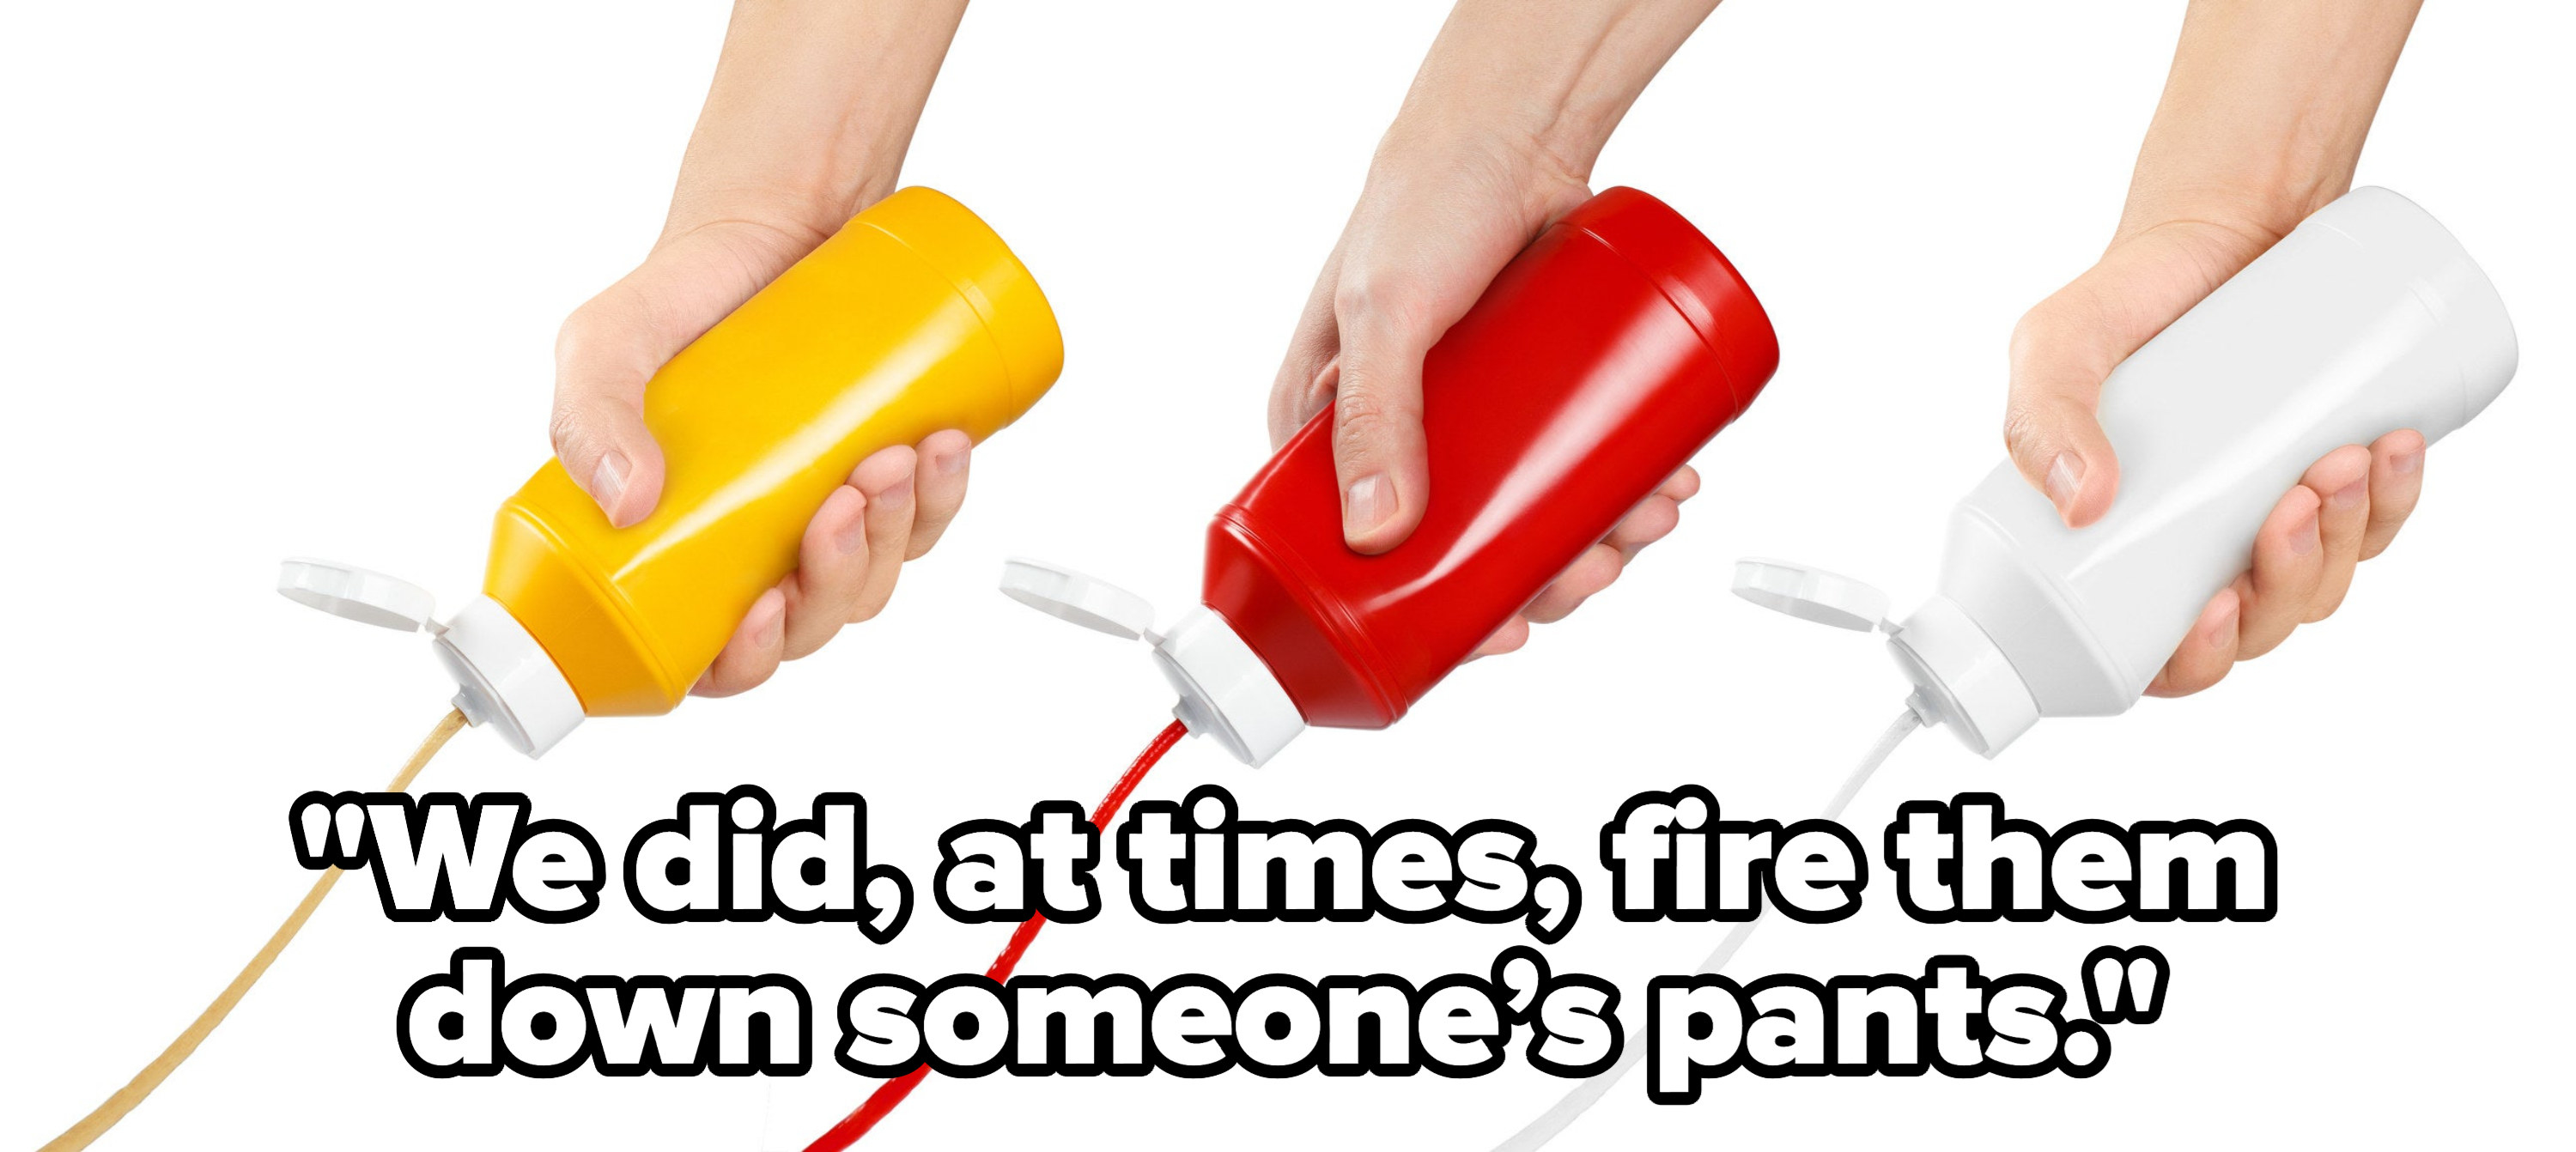 &quot;we did, at times, fire them down someone’s pants&quot; over hands squeezing bottles of condiments